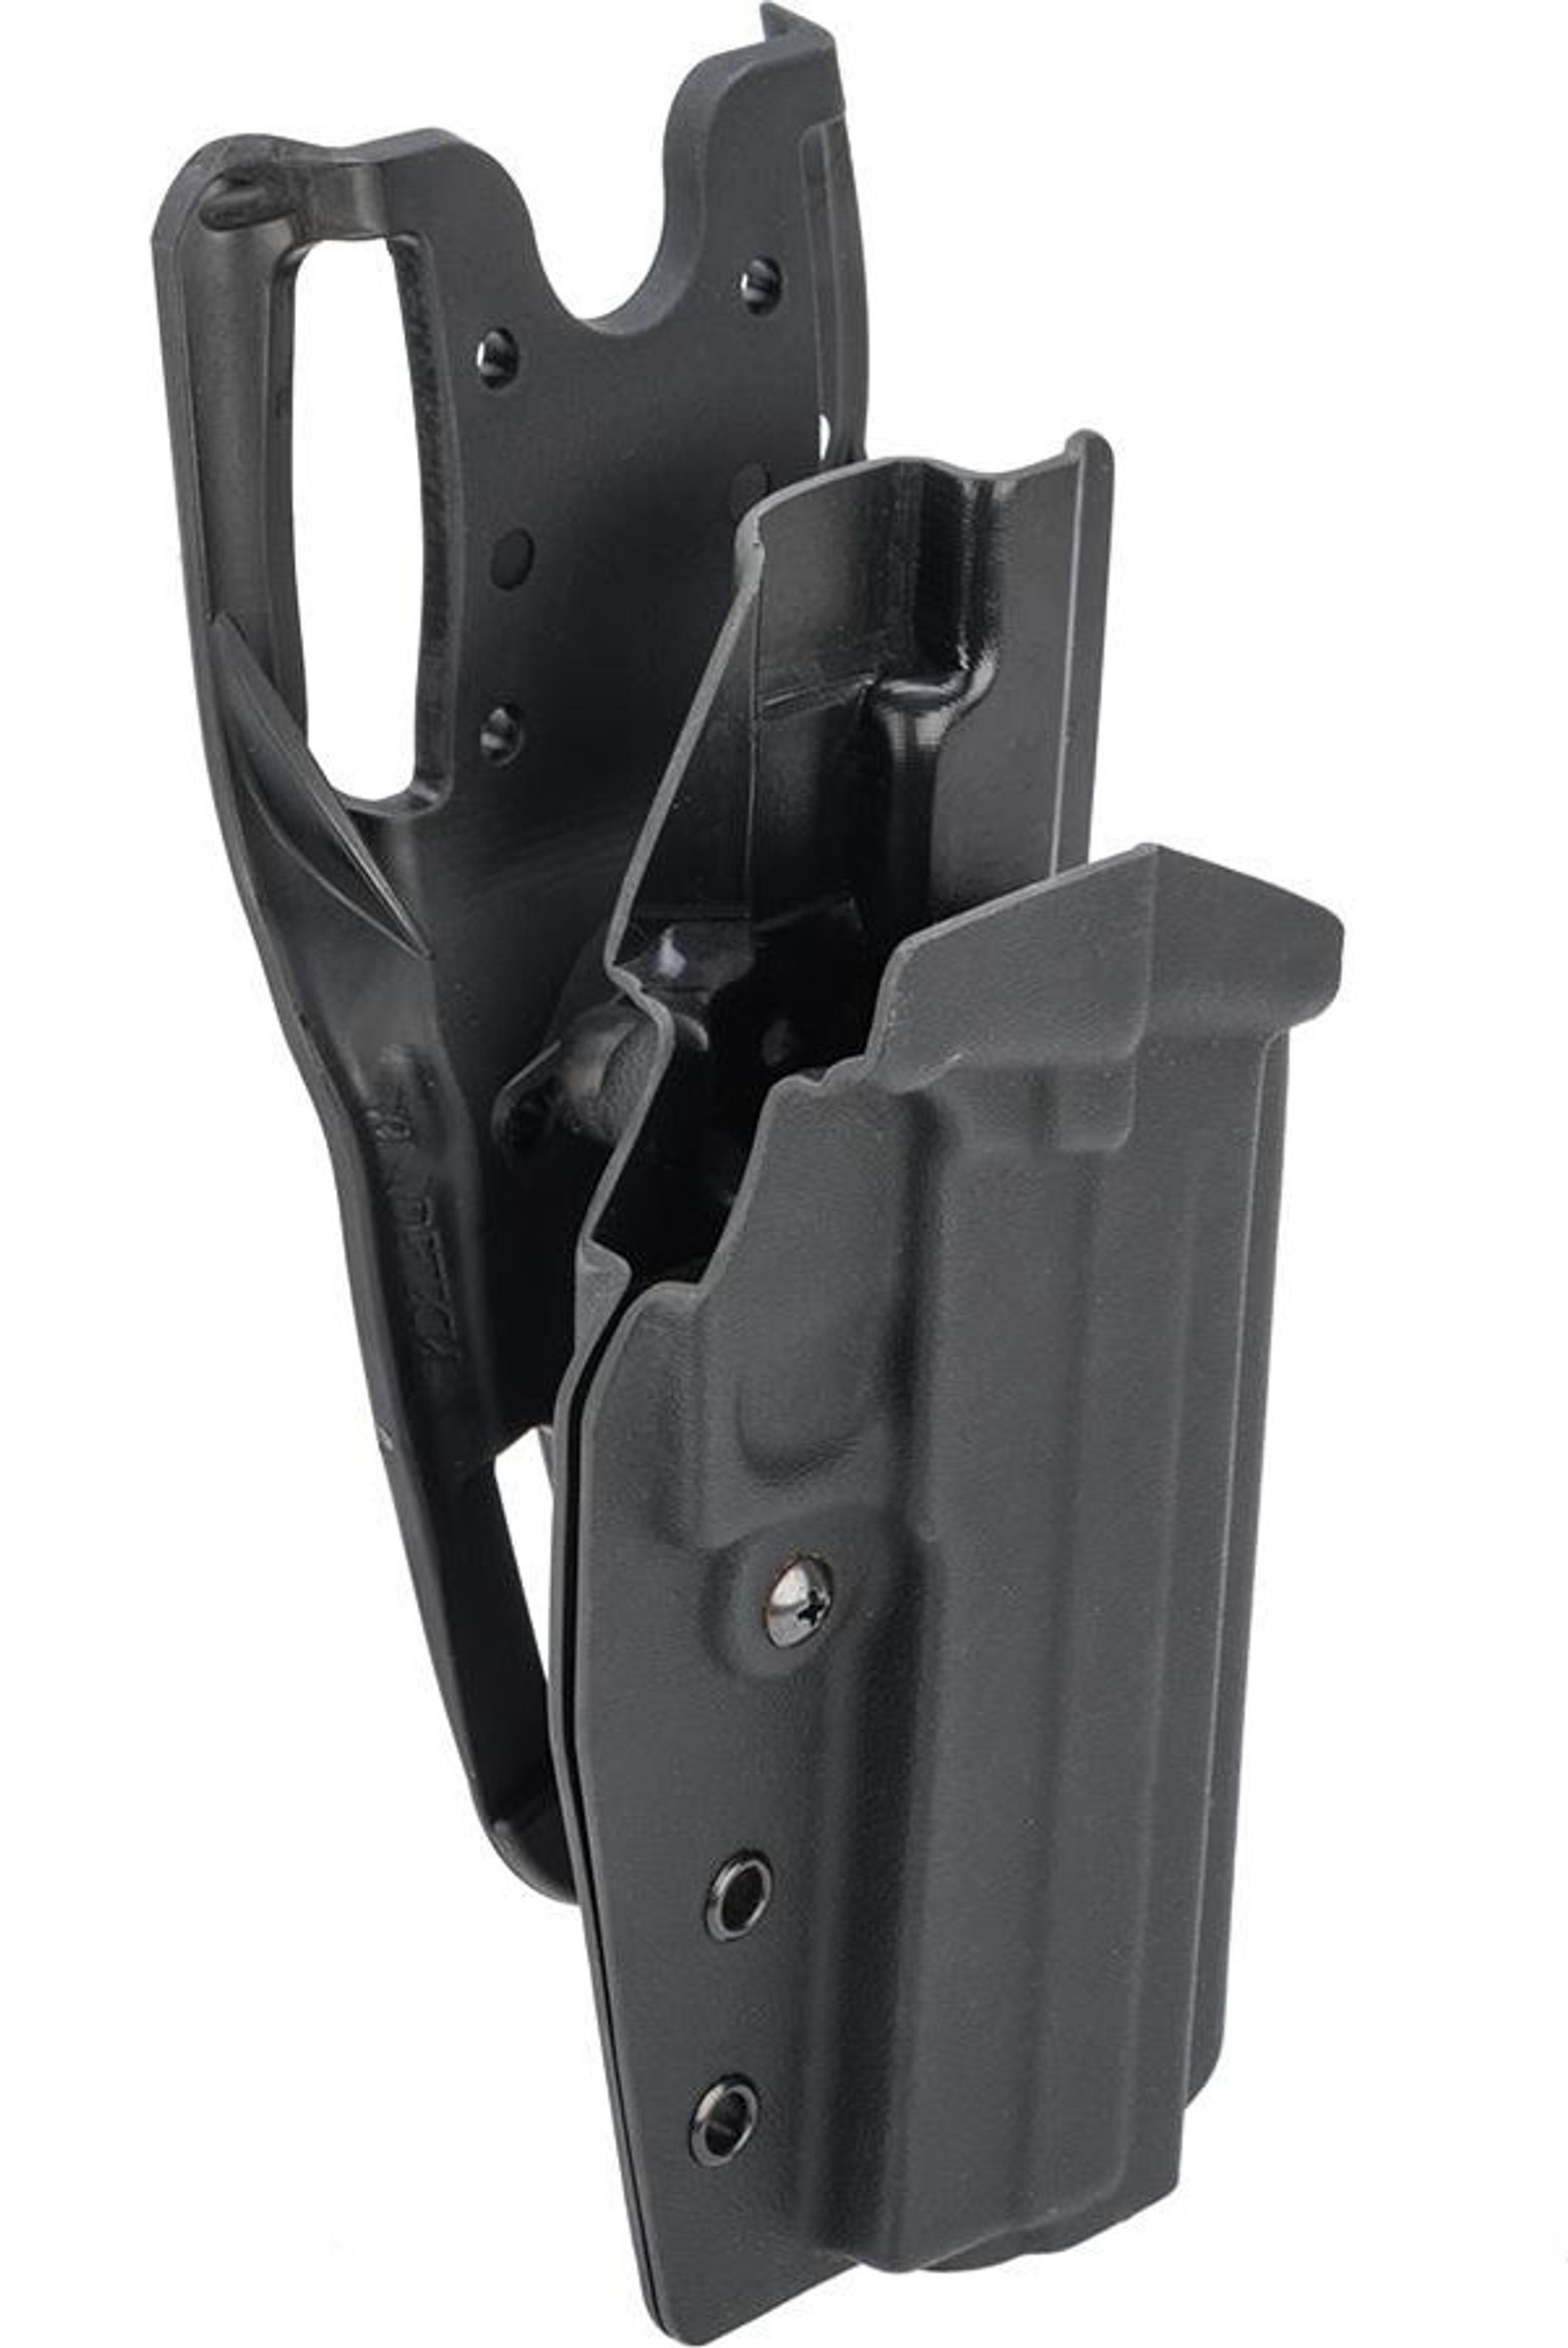 MC Kydex Airsoft Elite Series Pistol Holster for P226 (Model: Black / Duty Drop / Right Hand)